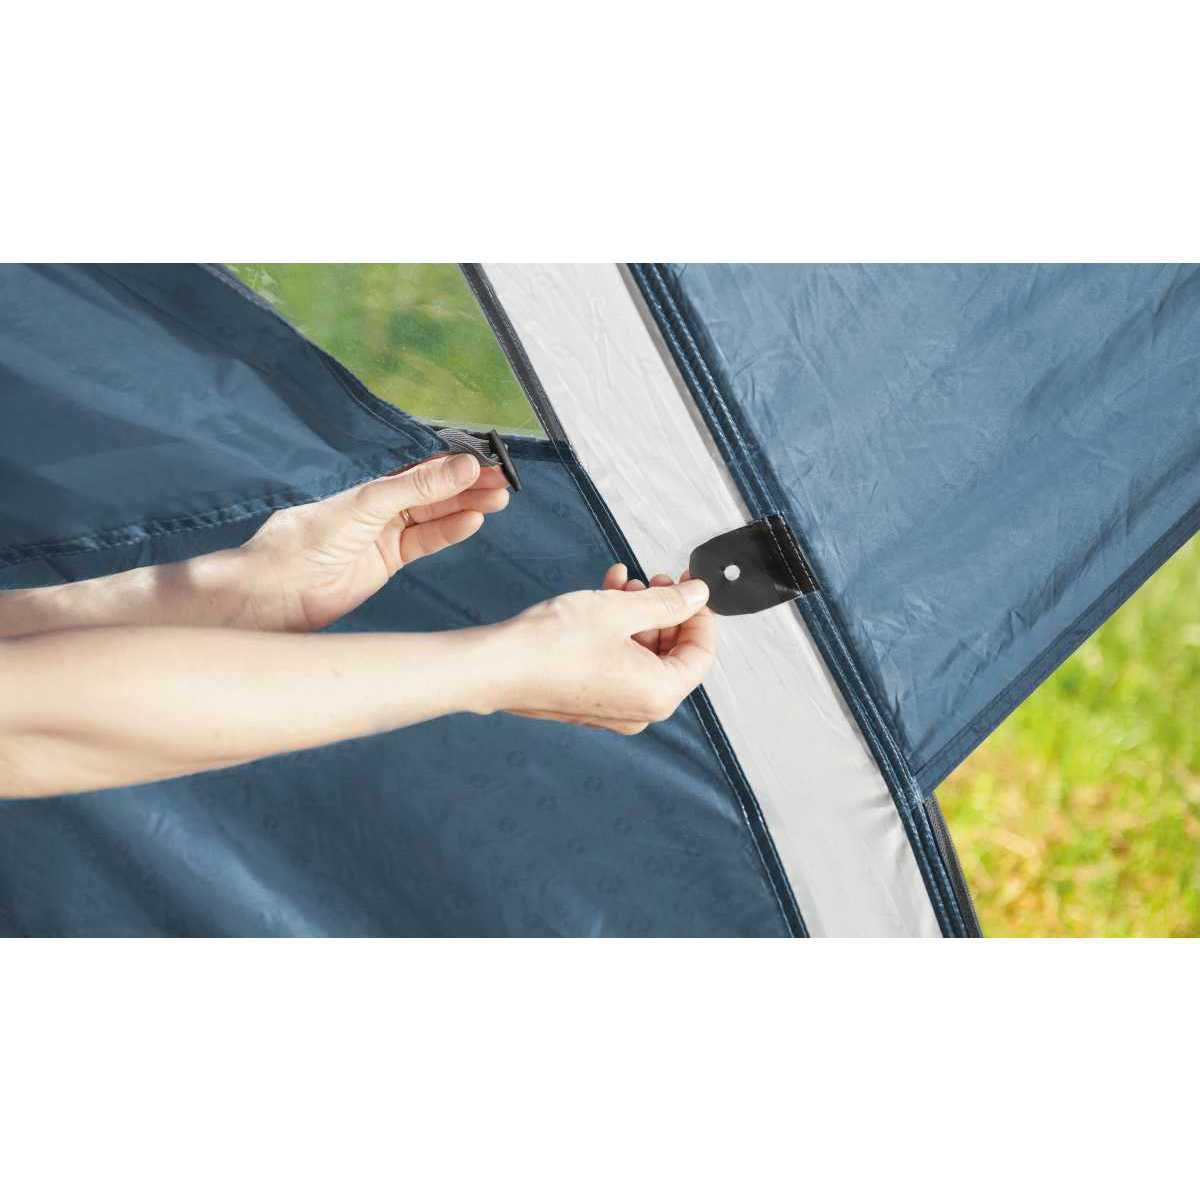 Outwell Campingzelt Cloud 5 Plus - 111259